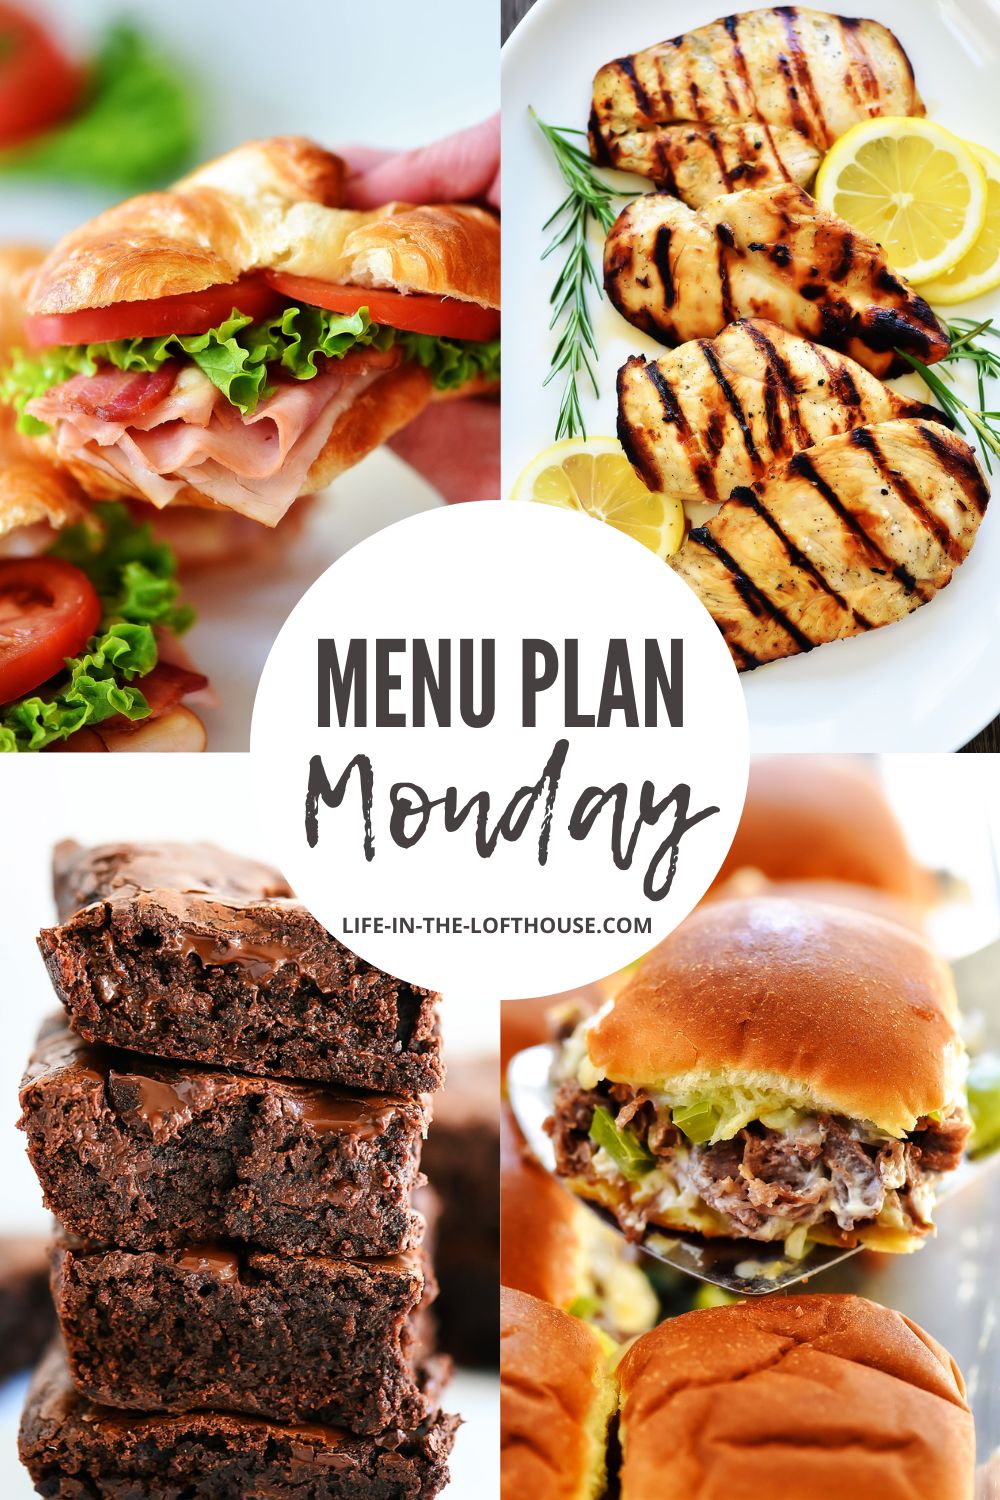 Menu Plan Monday is a list of six dinners and one dessert recipe. Life-in-the-Lofthouse.com